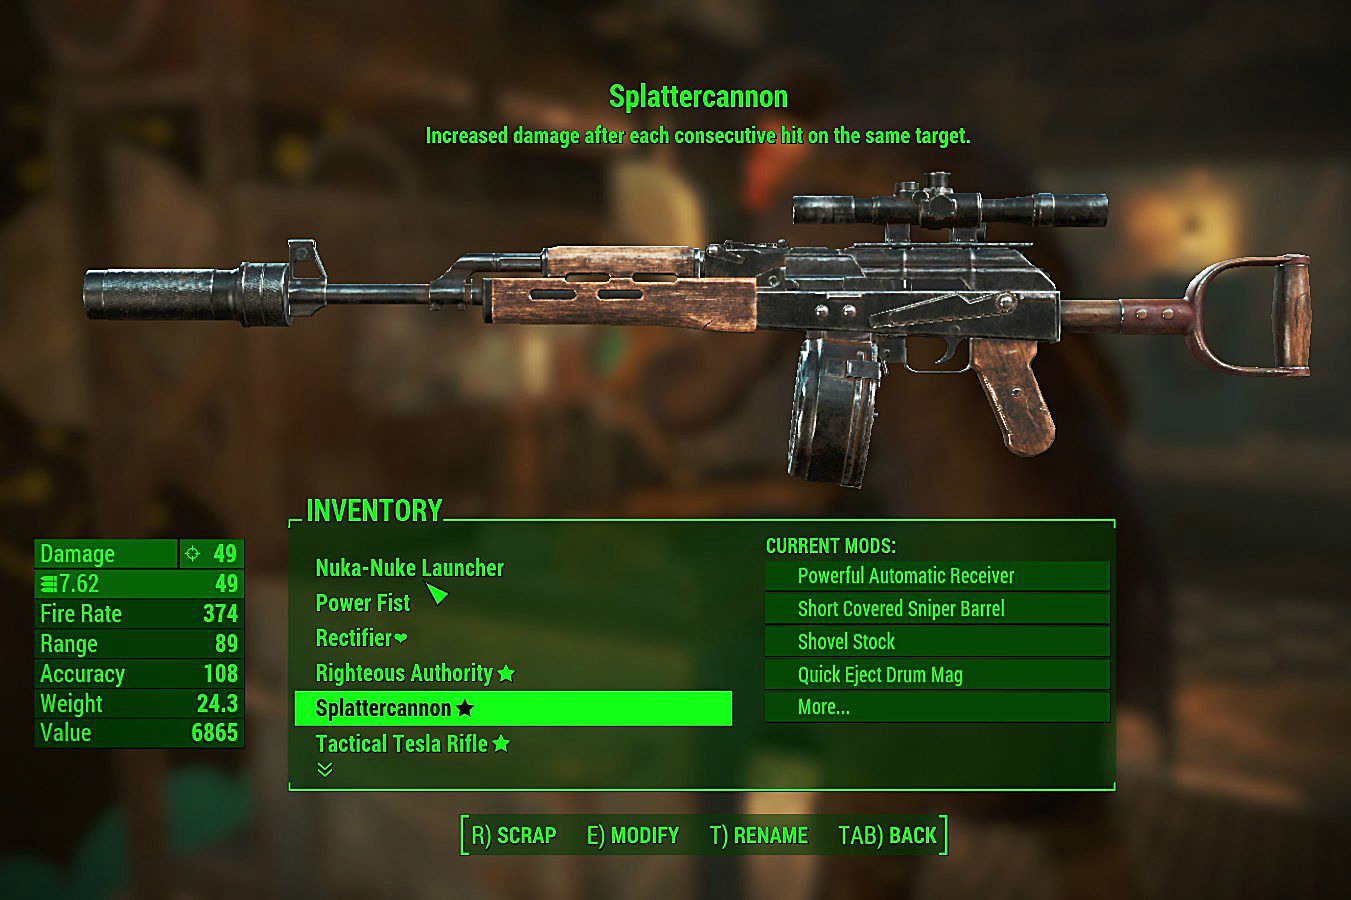 The Splattercannon weapon from Fallout 4.